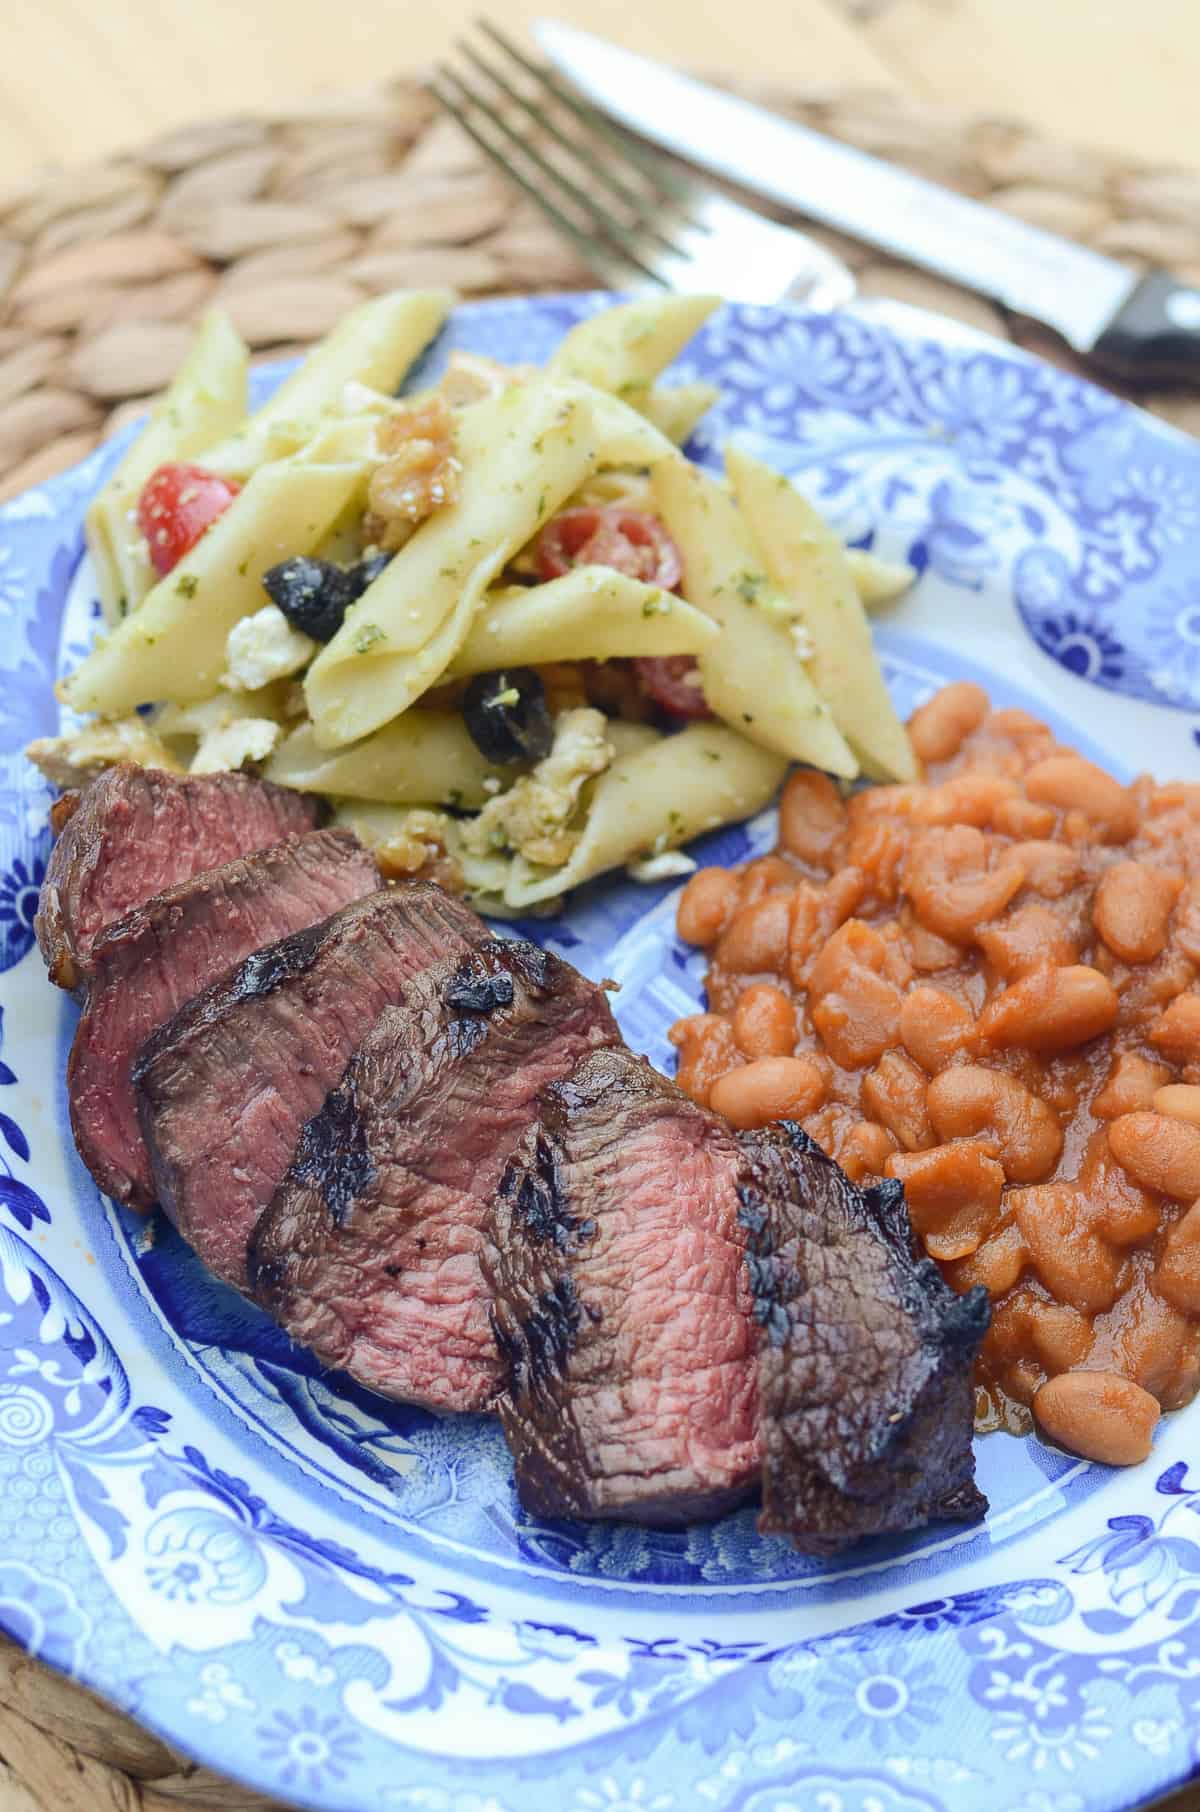 Sliced grilled steak on a blue plate with pasta salad and beans.